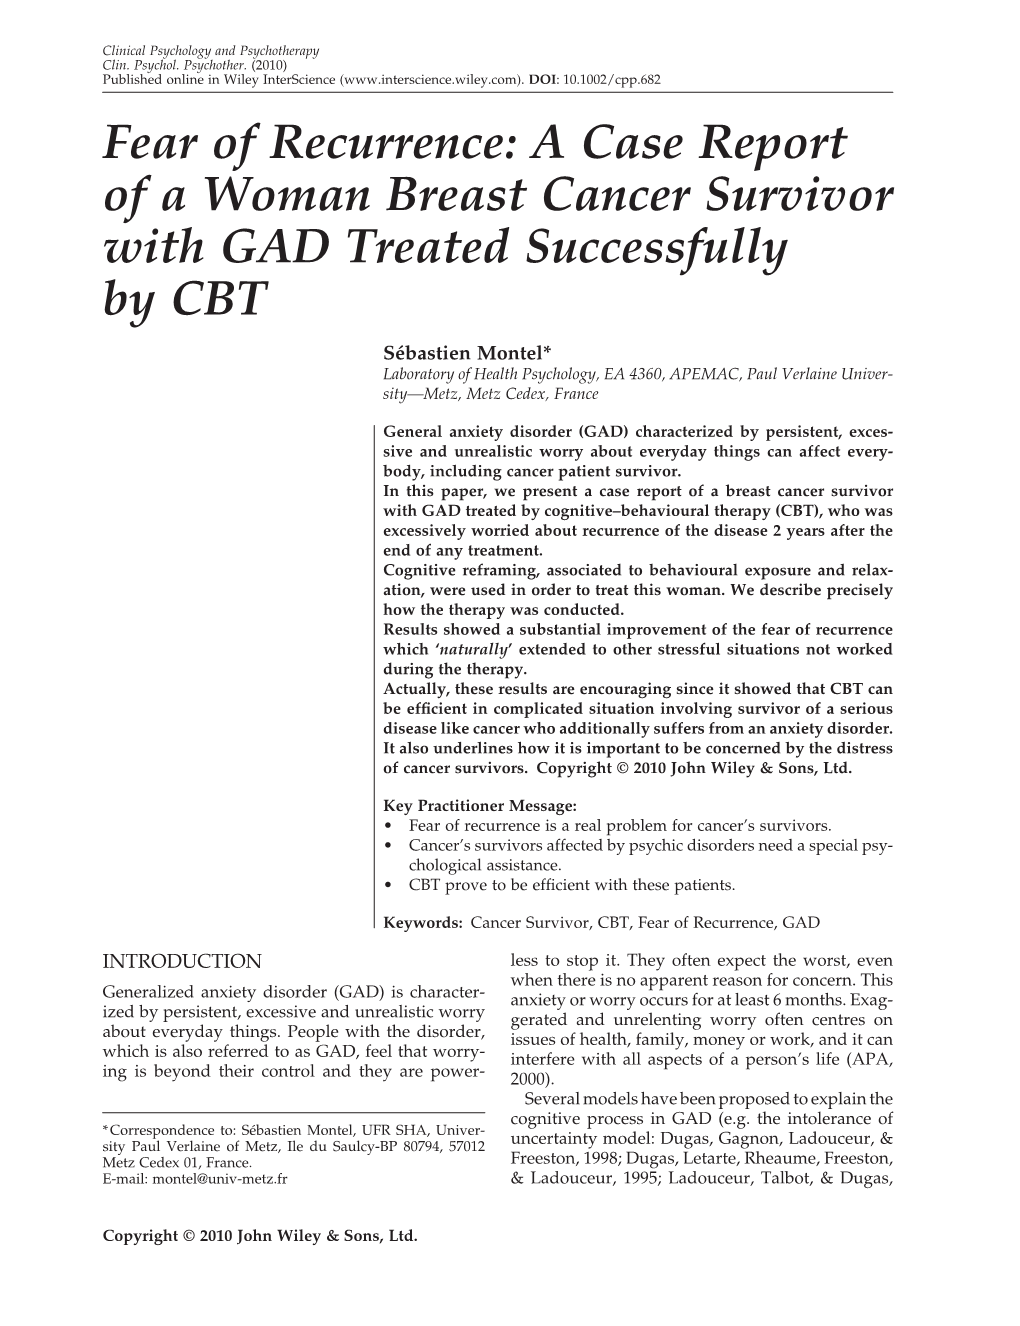 A Case Report of a Woman Breast Cancer Survivor